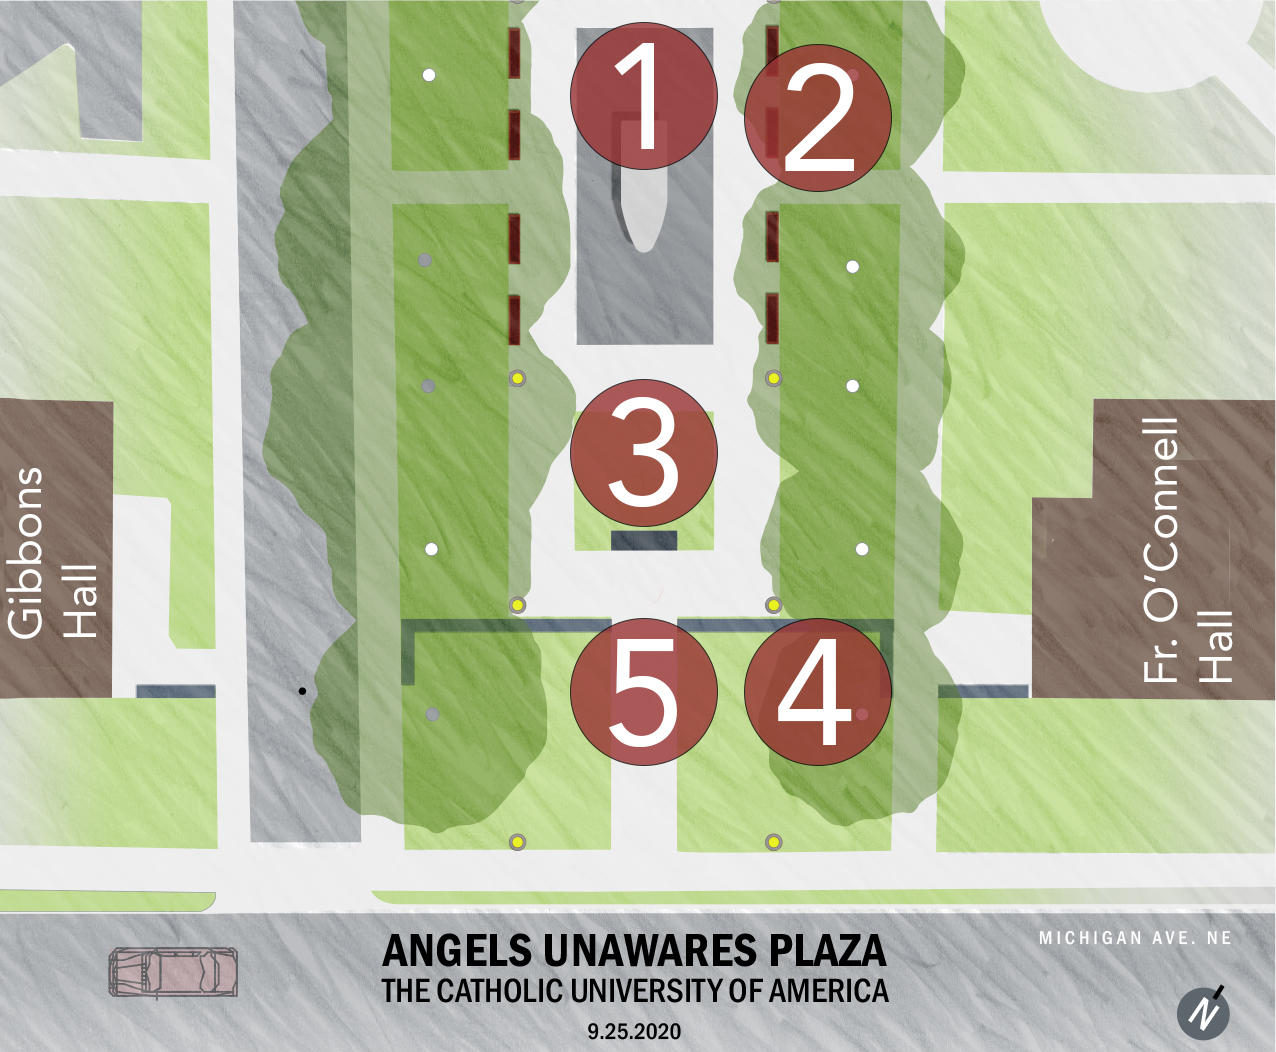 Placement of Angels Unawares on campus